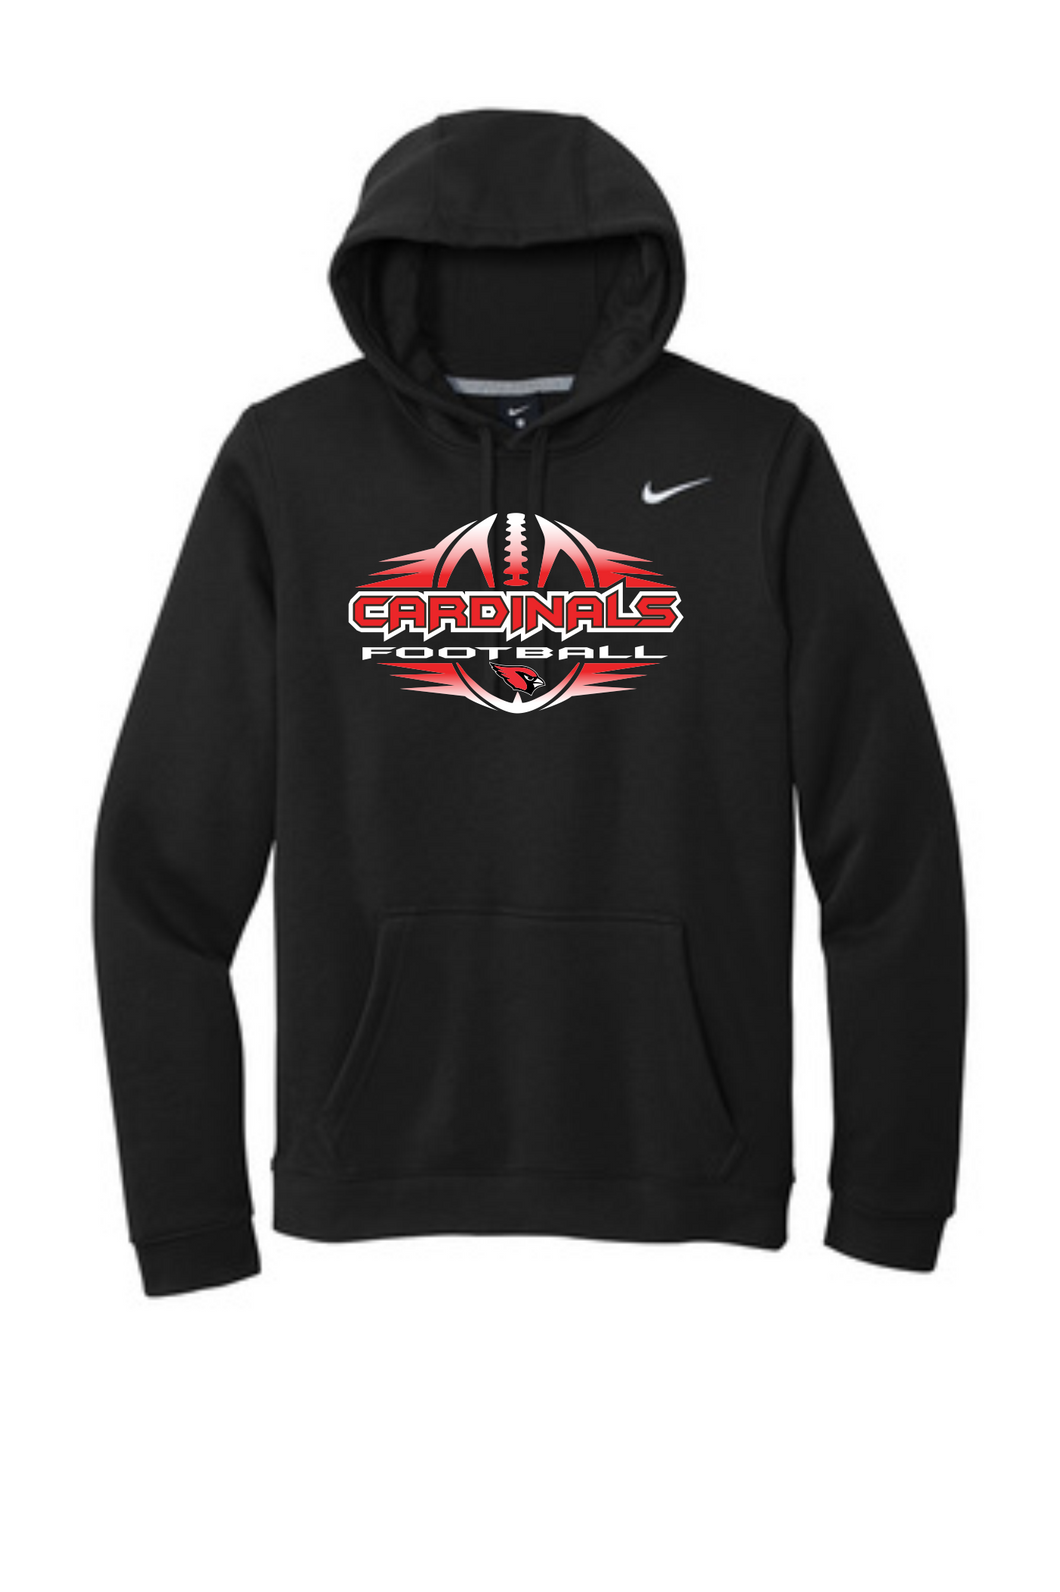 Nike Pullover Hoodie- Adult S-XL Only